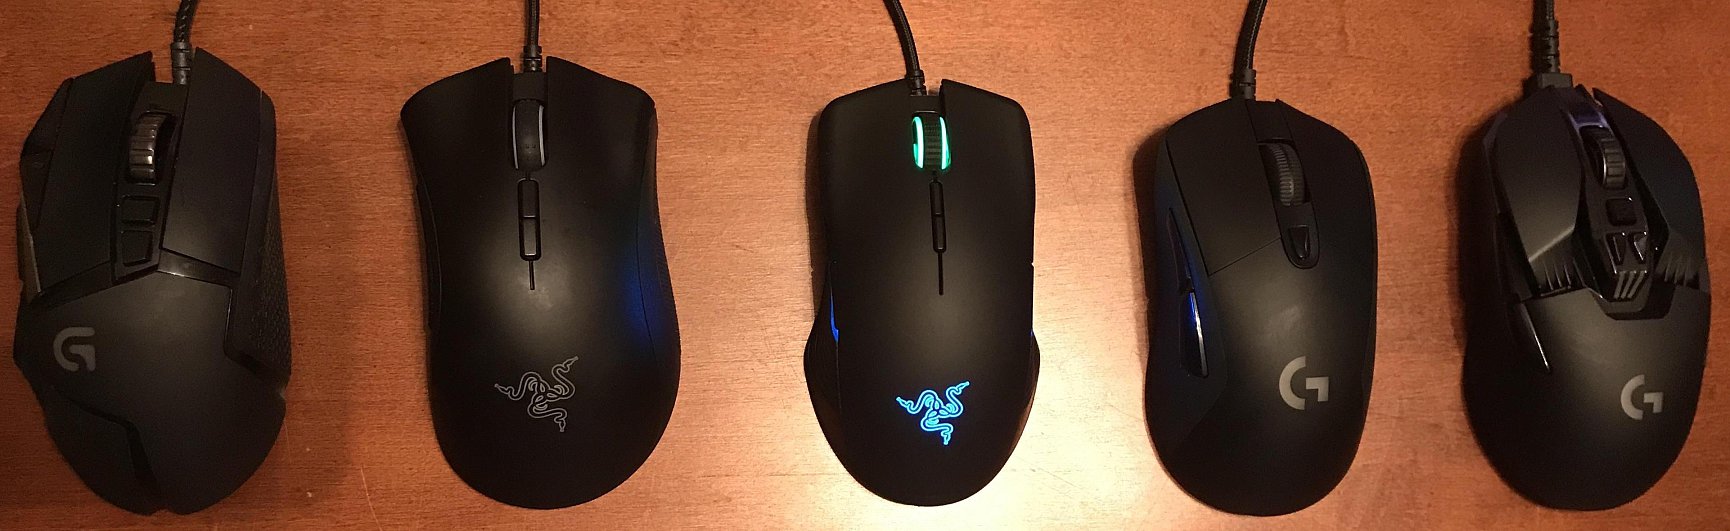 logitech and razer mouses